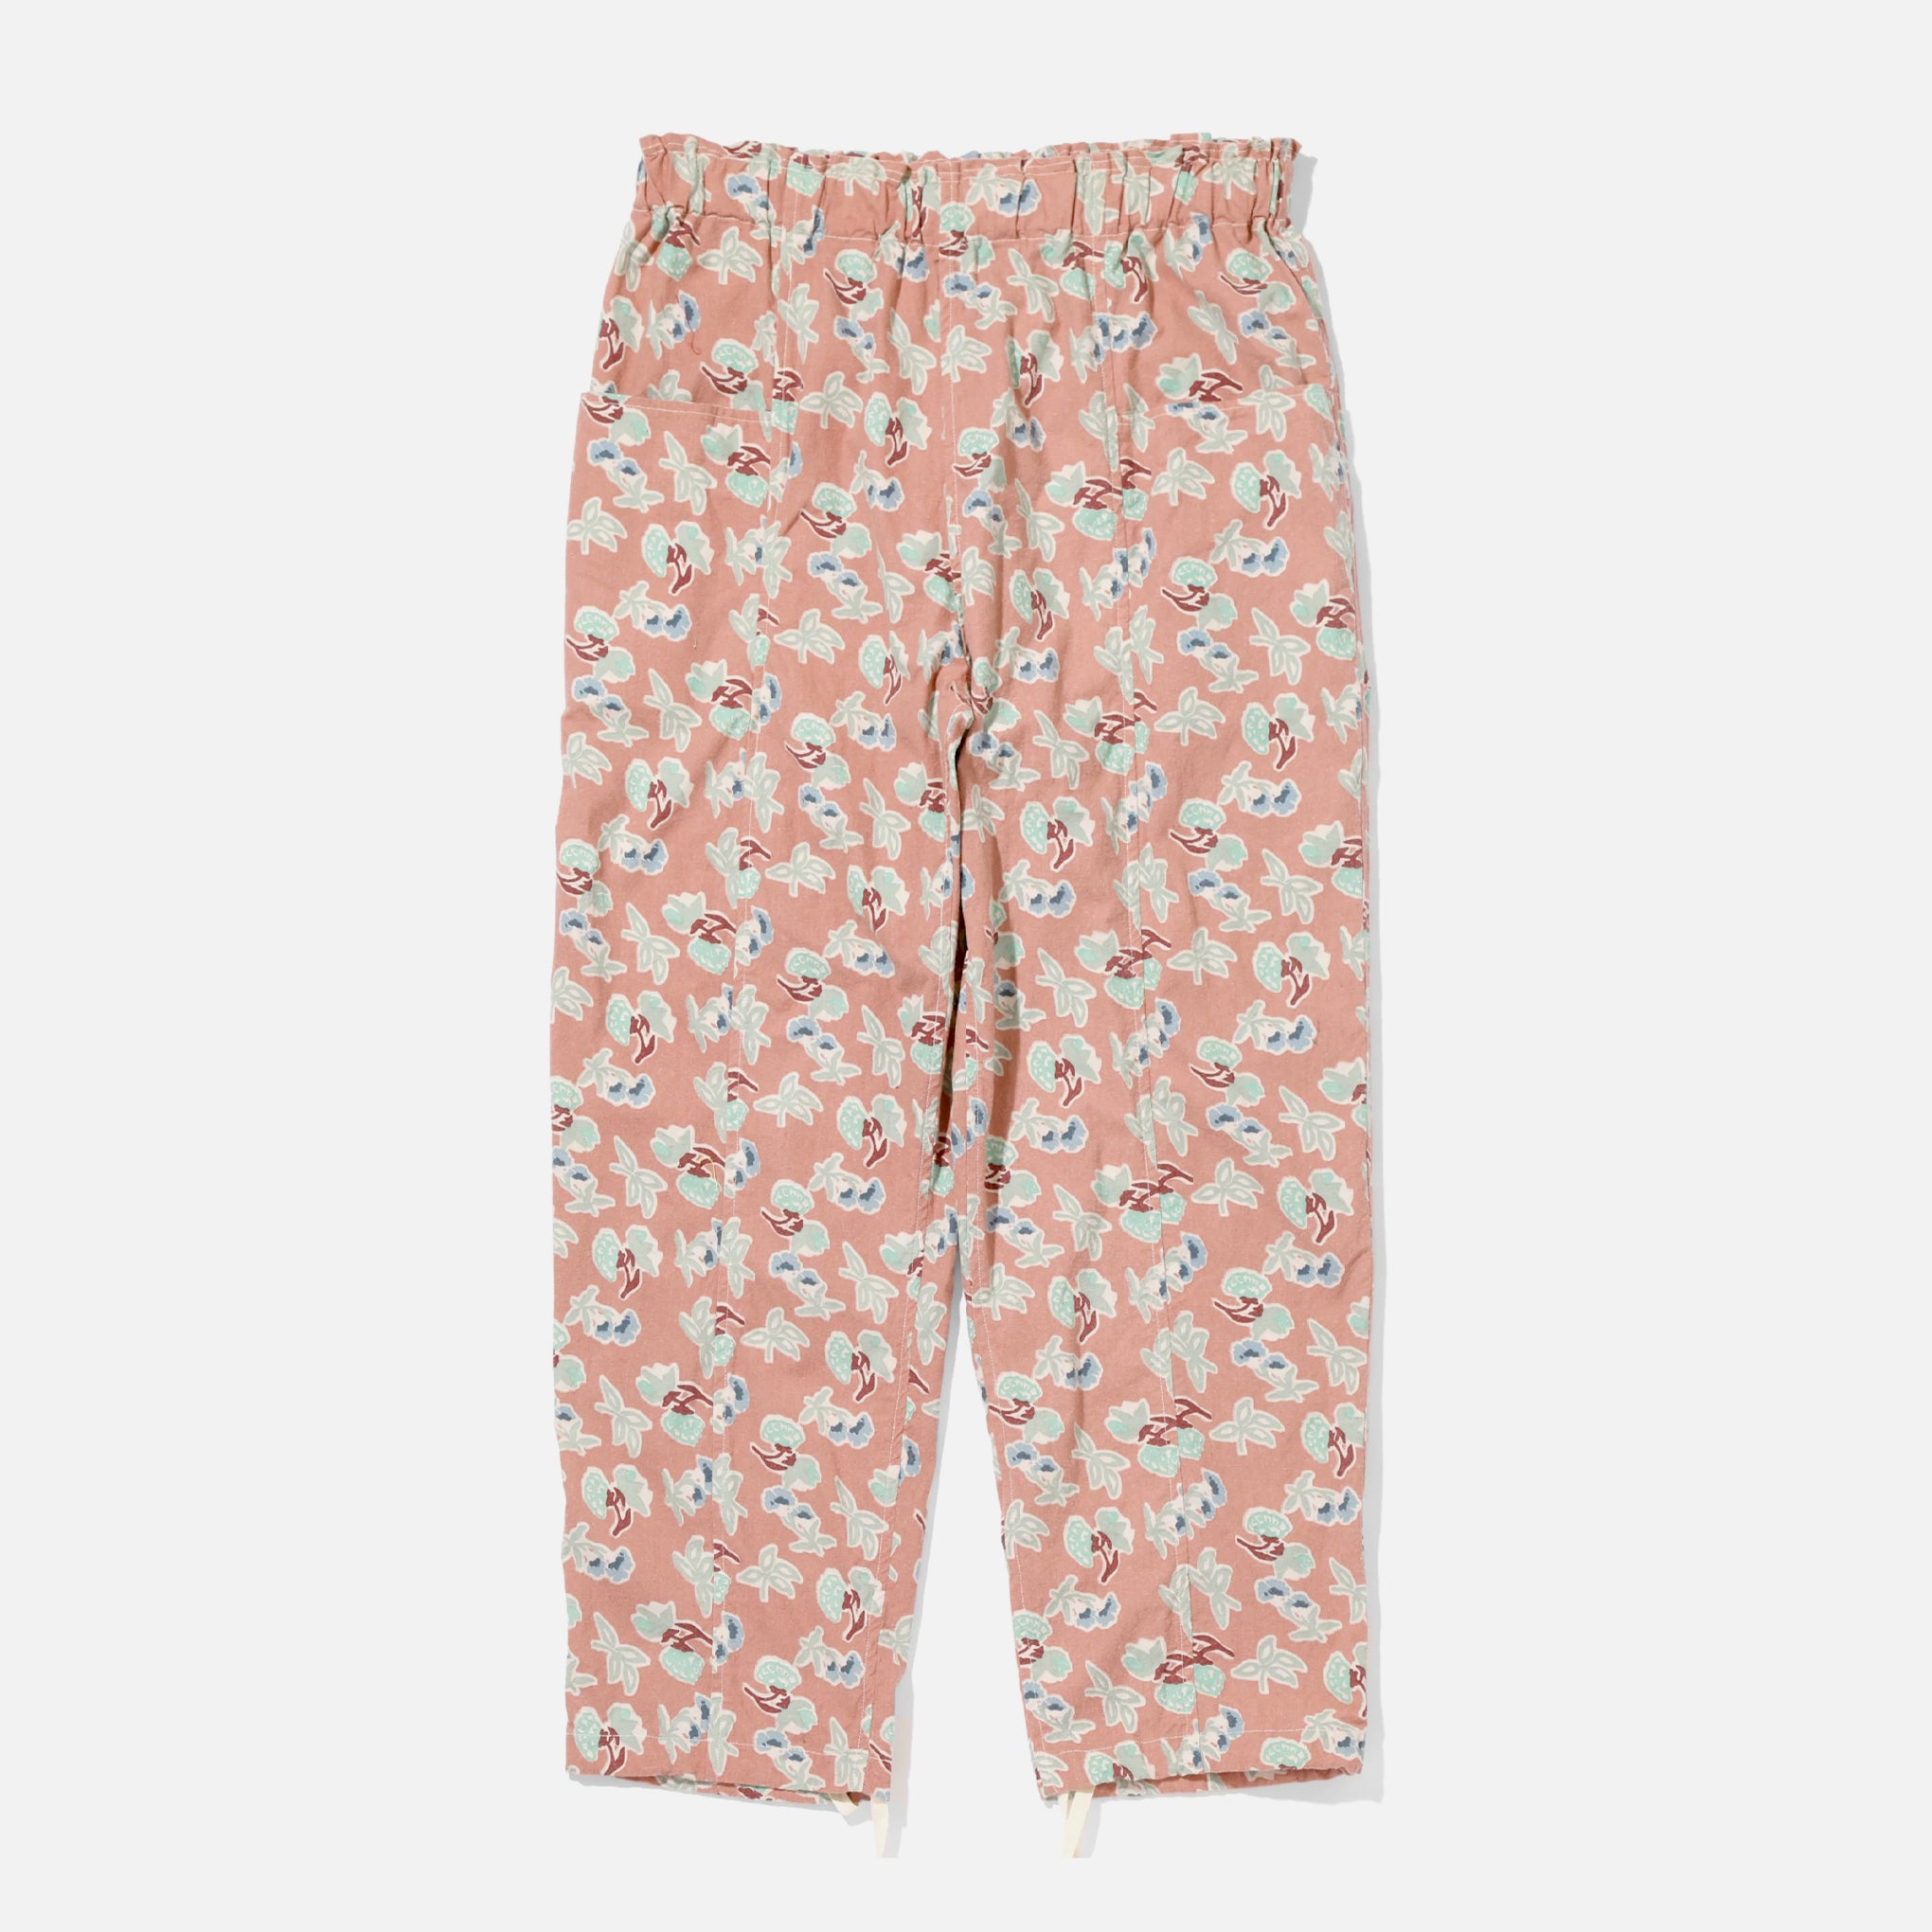 South2 West8 Army String Pant - Botanical Flannel Pt.